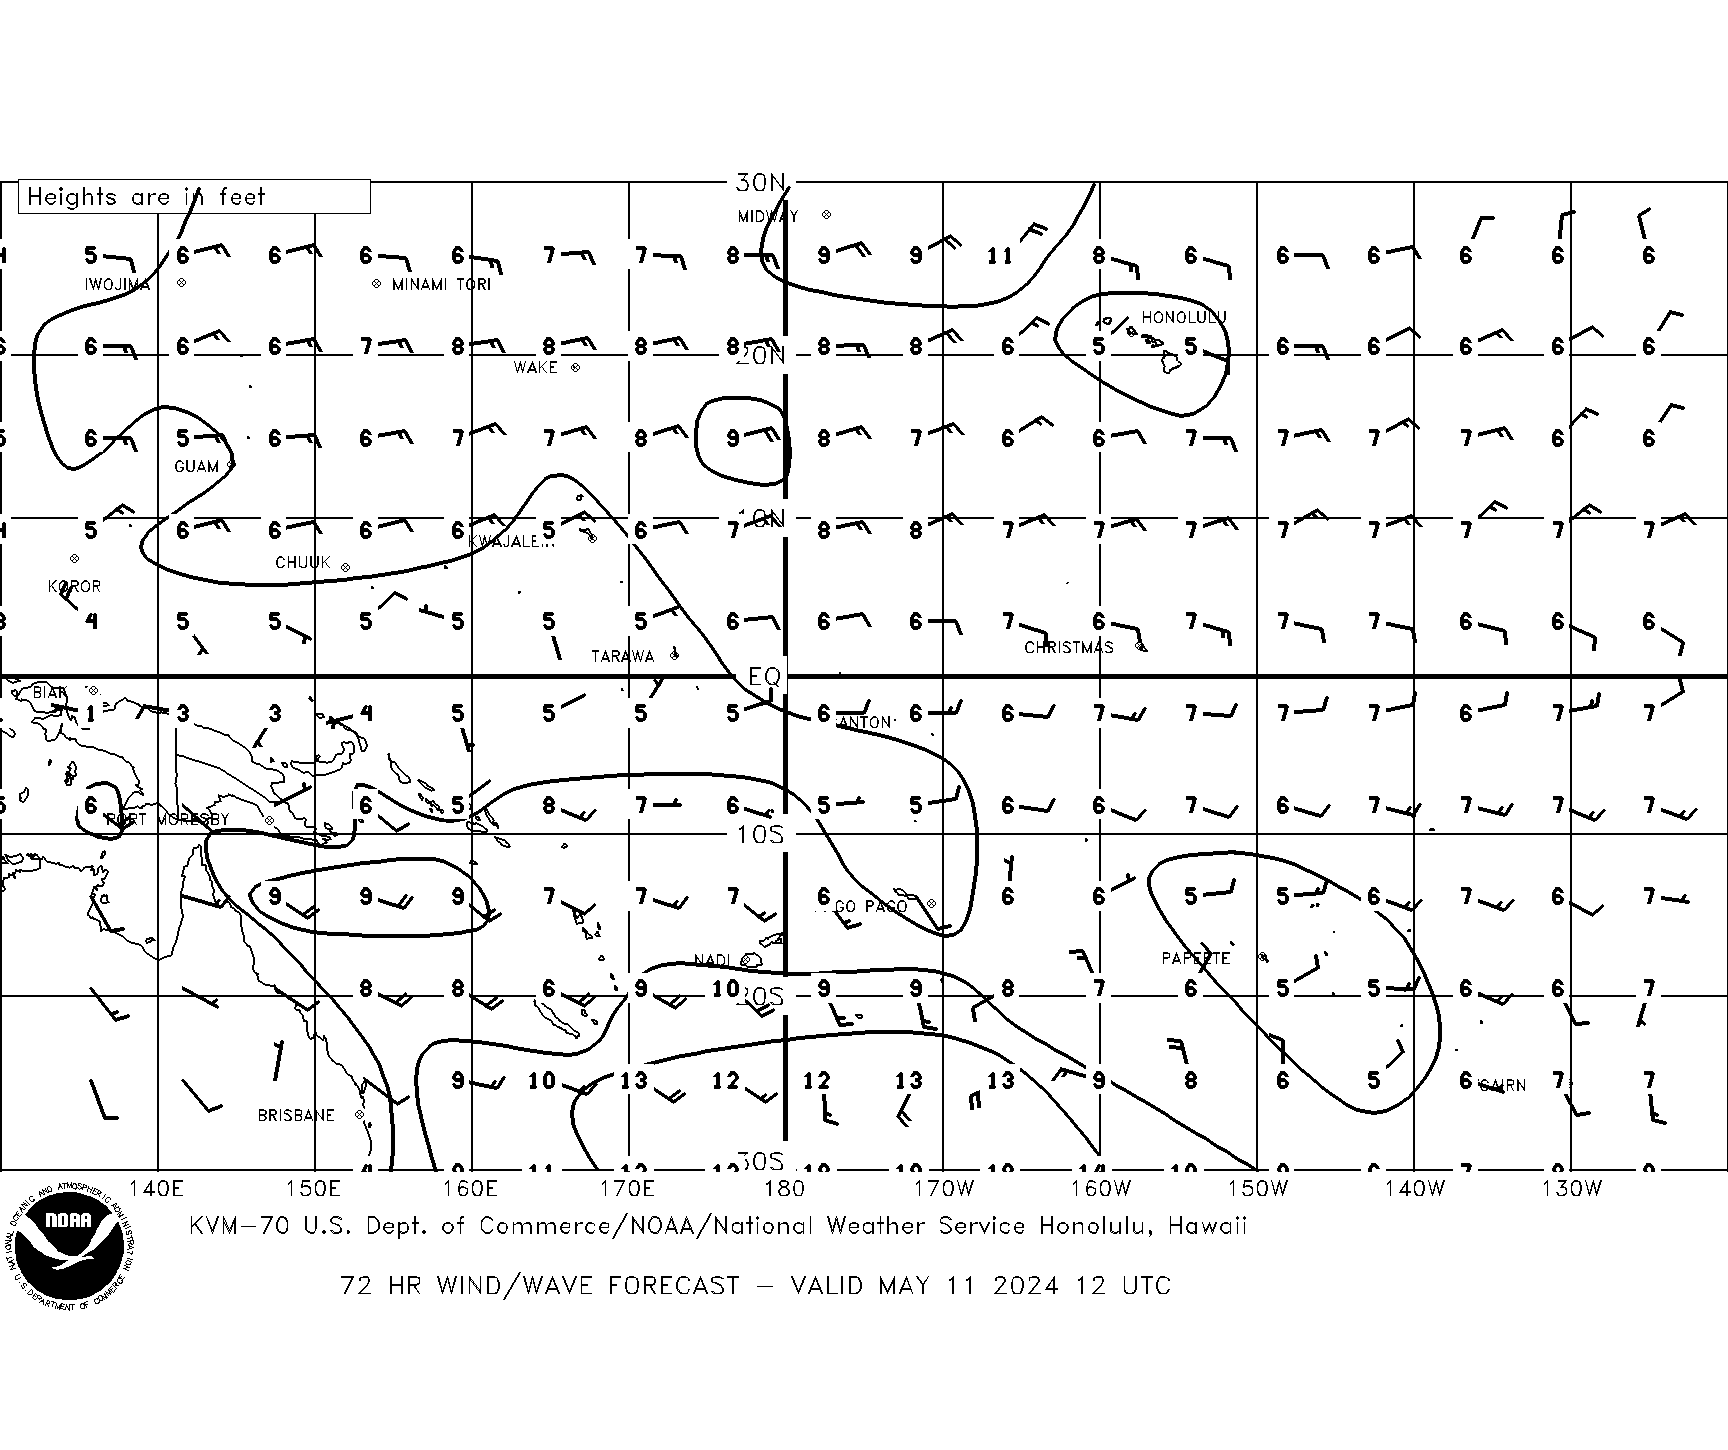 72HR Pacific Sea State Forecast